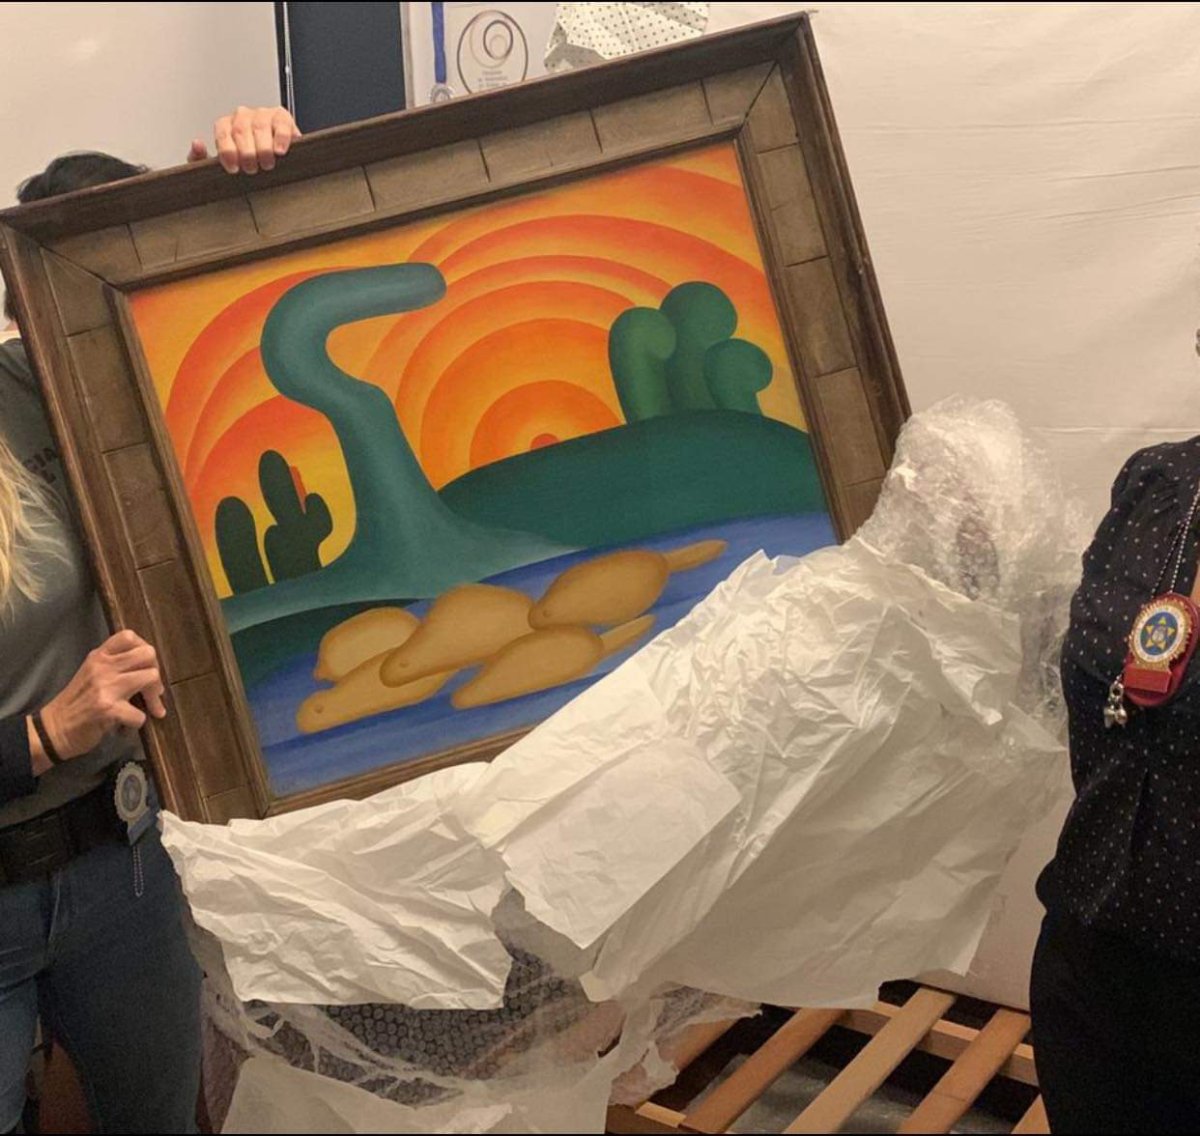 A photo shared by police in Rio de Janeiro showing the moment when two police officers recovered a precious piece of art that was stolen in an elaborate scheme orchestrated by the victim's daughter.